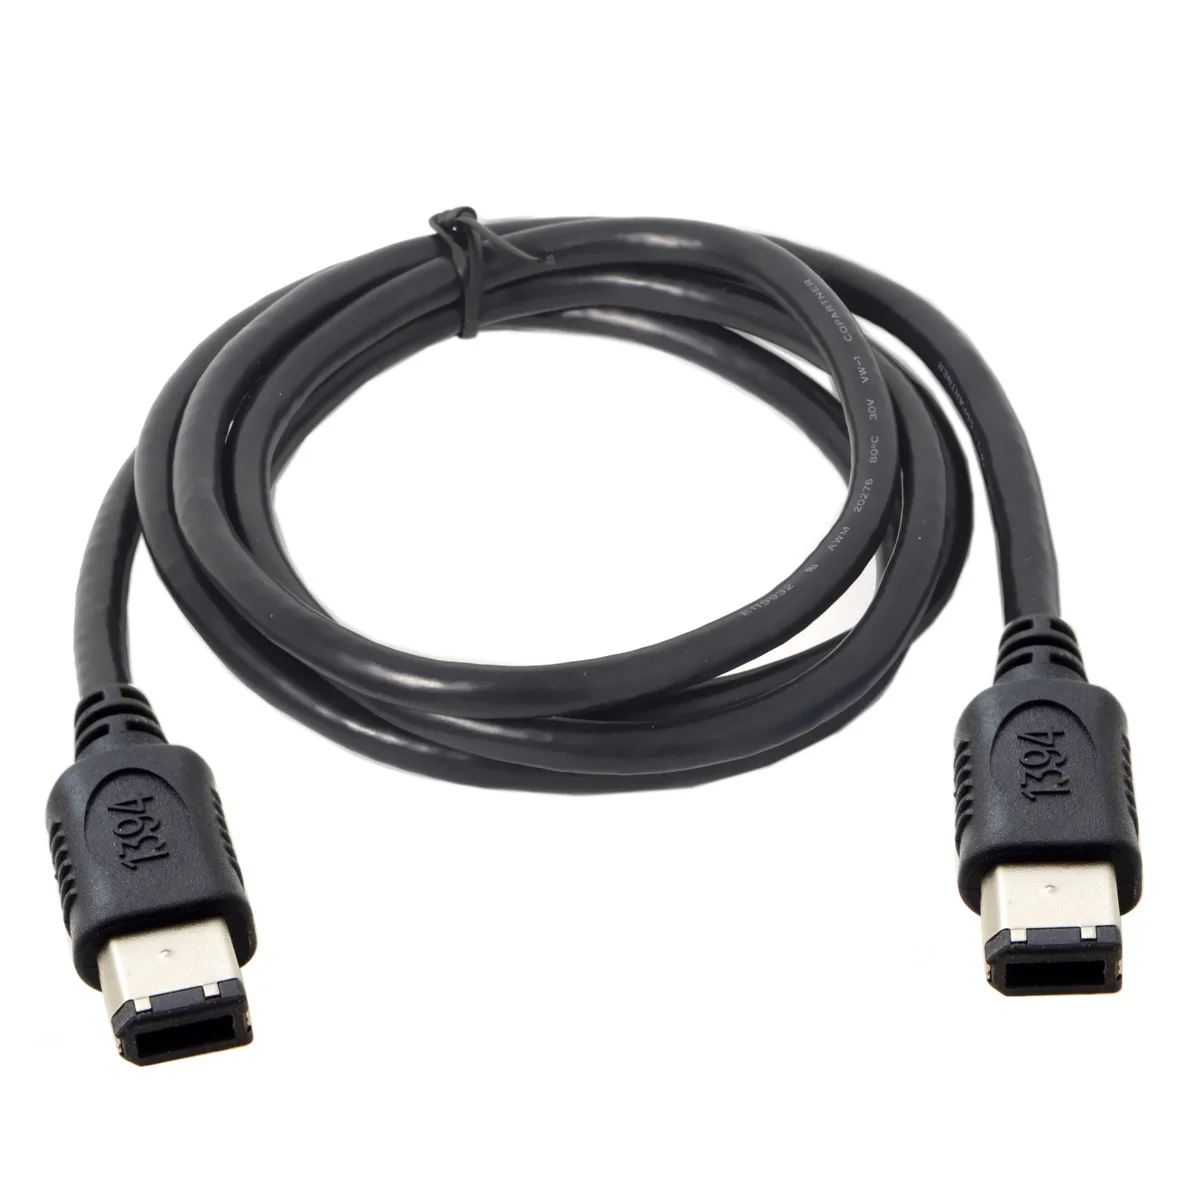 

CYSM Chenyang IEEE 1394 FireWire 400 6Pin to FireWire 400 6Pin 6-6 ilink Cable 1.8m 6FT